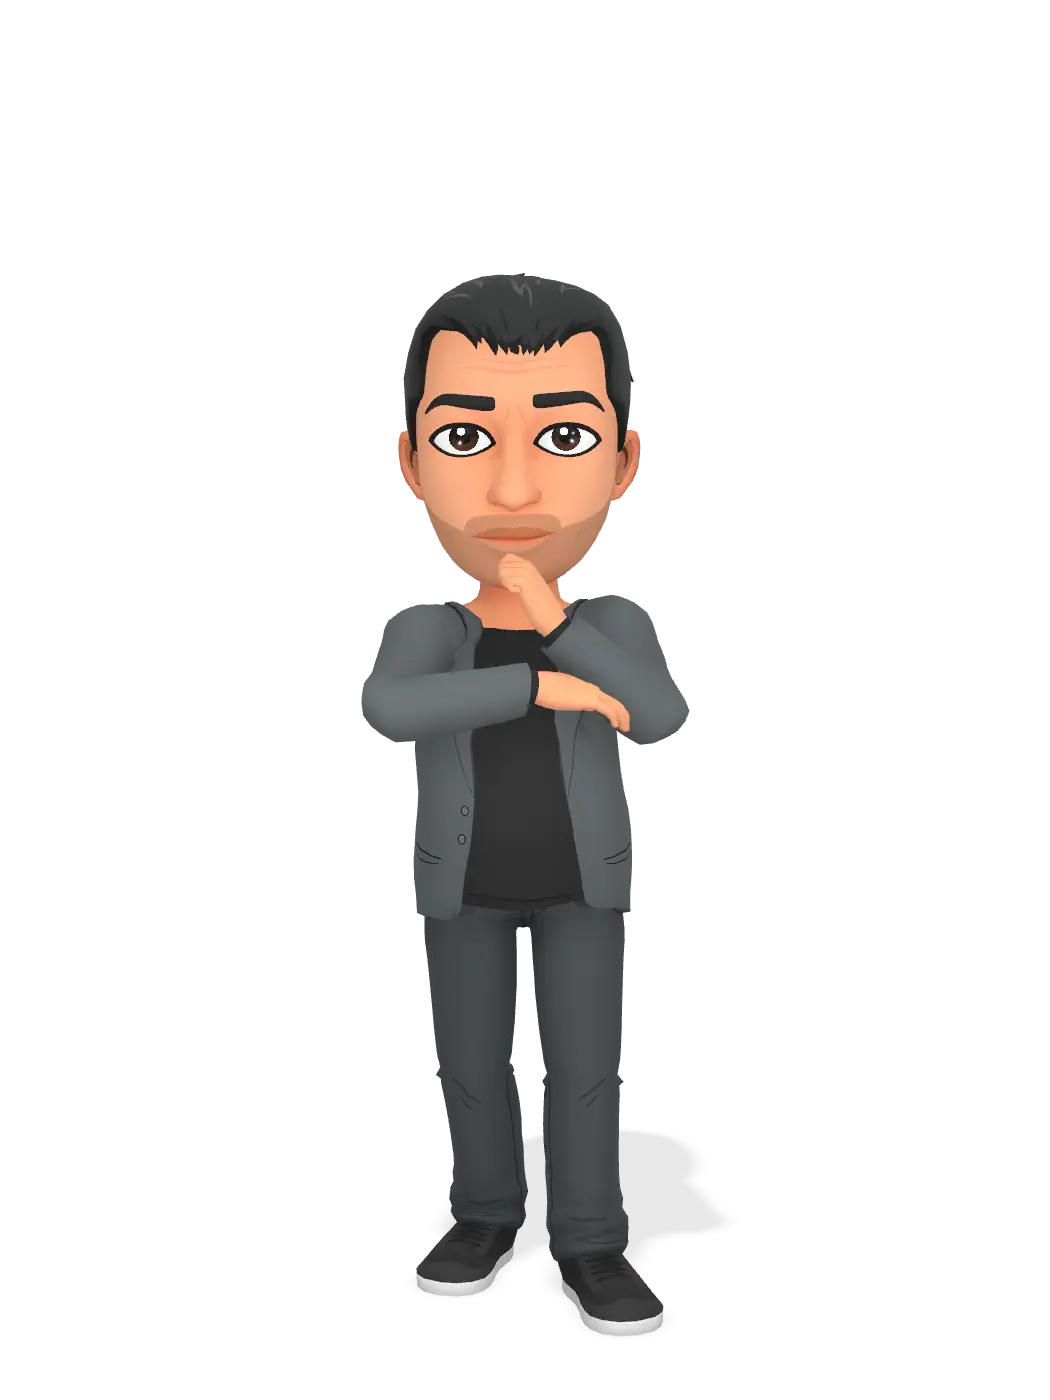 3D Bitmoji for thisisdjcable